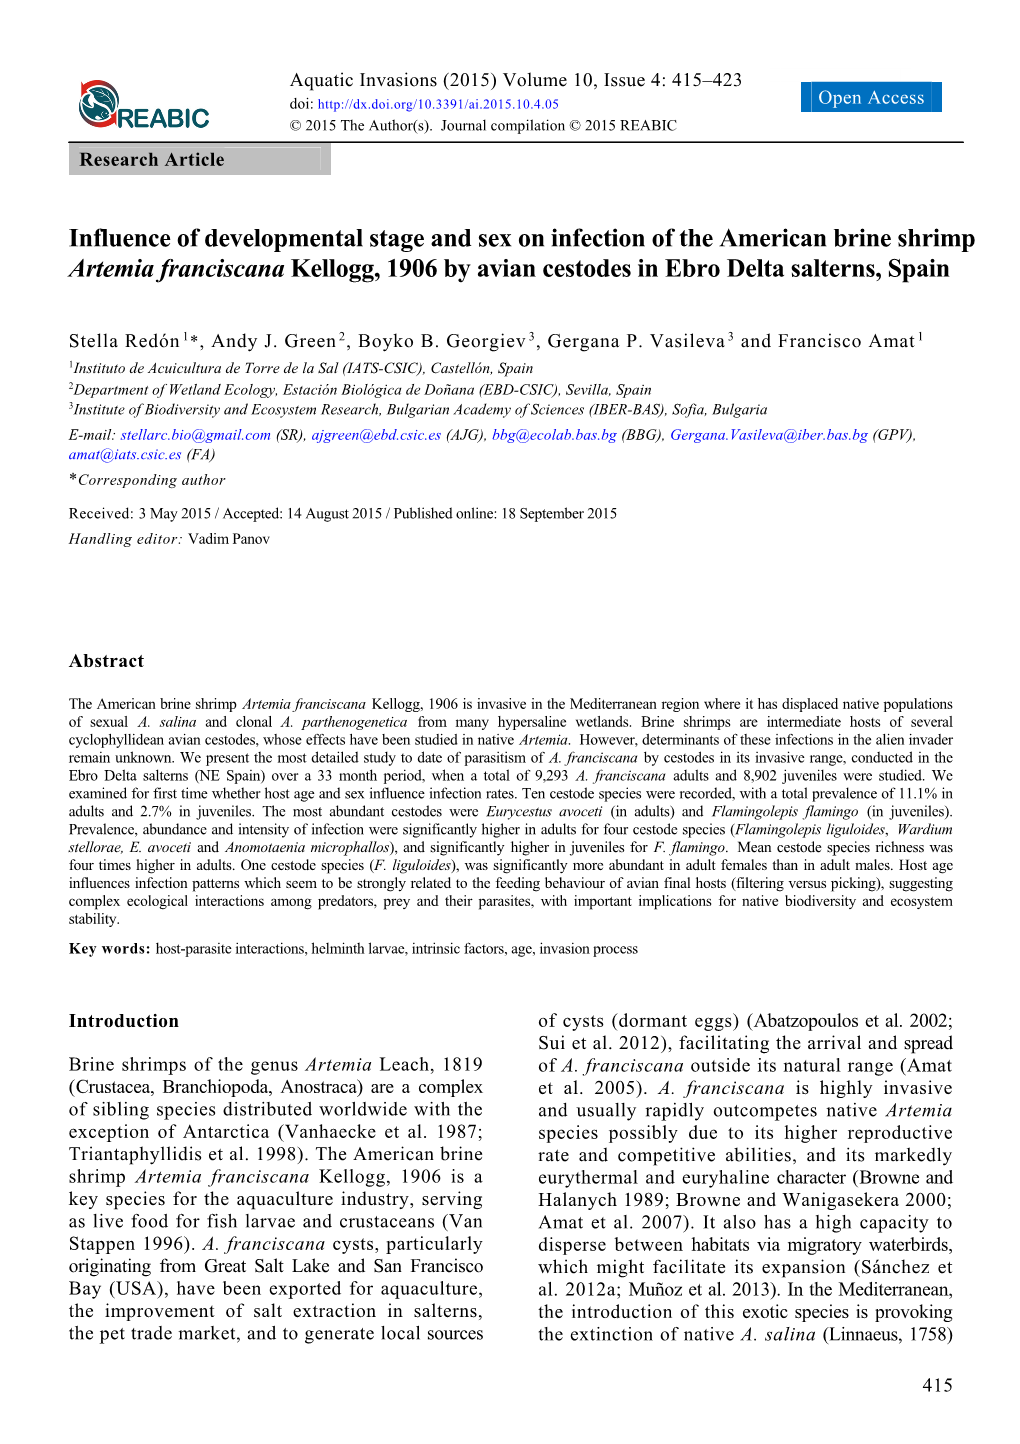 Influence of Developmental Stage and Sex on Infection of the American Brine Shrimp Artemia Franciscana Kellogg, 1906 by Avian Cestodes in Ebro Delta Salterns, Spain